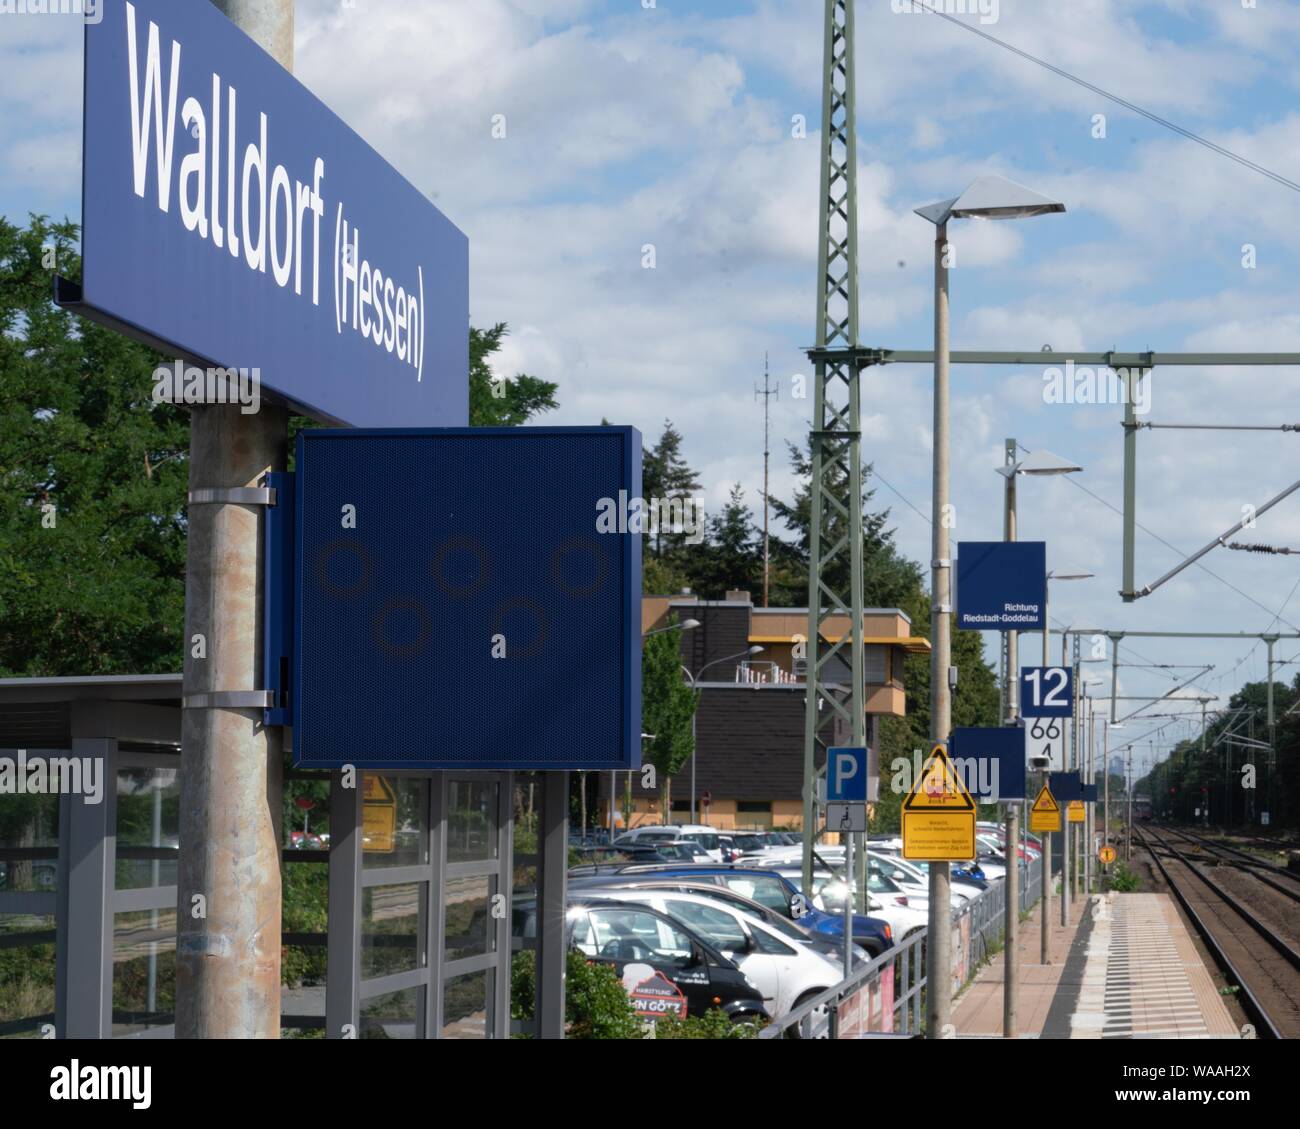 19 August 2019, Hessen, Mörfelden-Walldorf: The signal box at Walldorf  station was struck by lightning the evening before in a storm. Rail traffic  was interrupted for hours on the busy route between